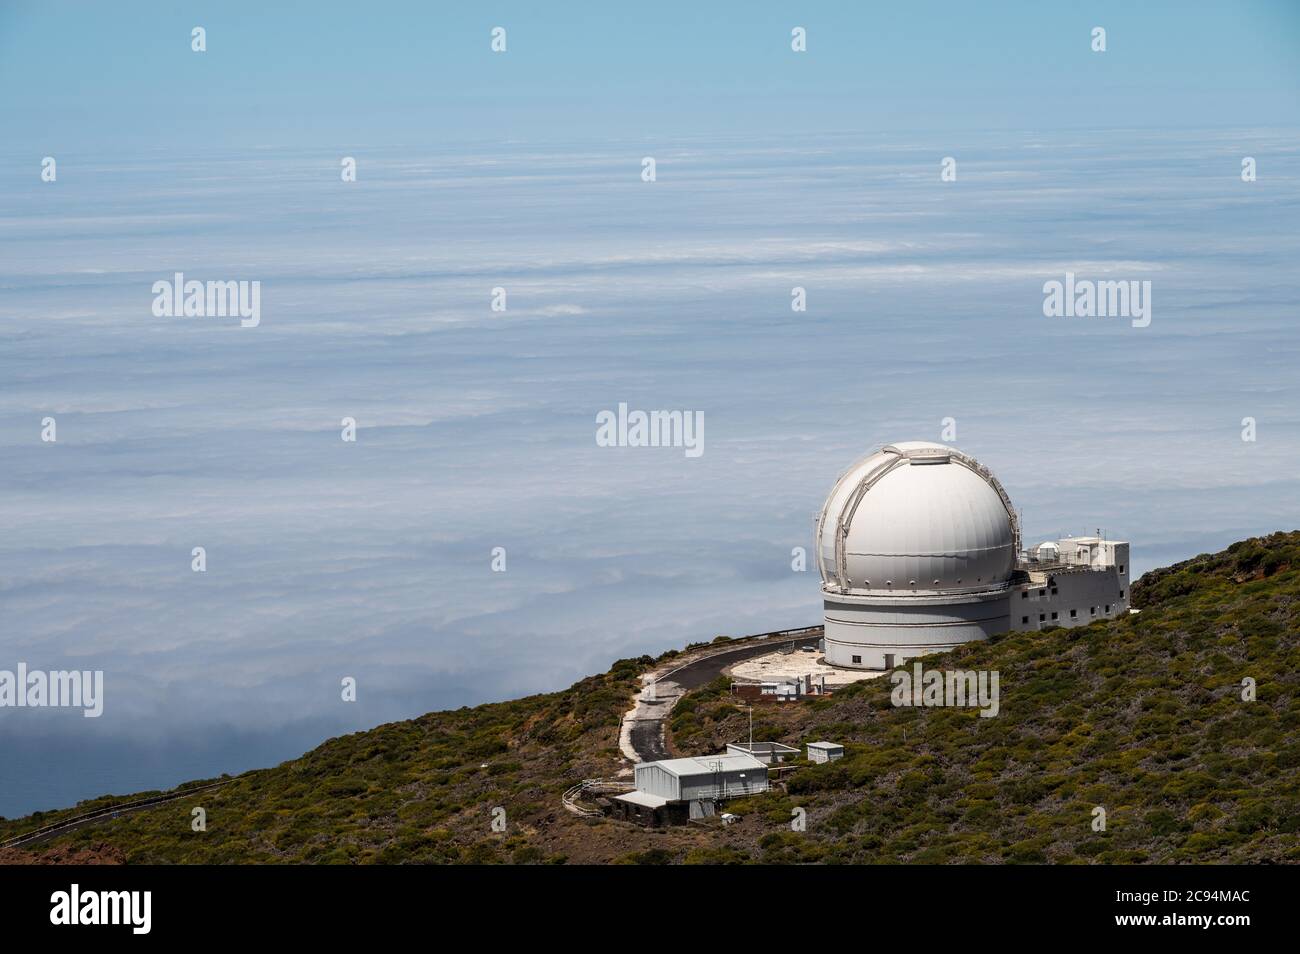 Immigratie rukken vijand La Palma, Spain. 28th July, 2020. Telescope in Roque de los Muchachos  Observatory, where some of the world's largest telescopes are located at  the highest point on the island of La Palma